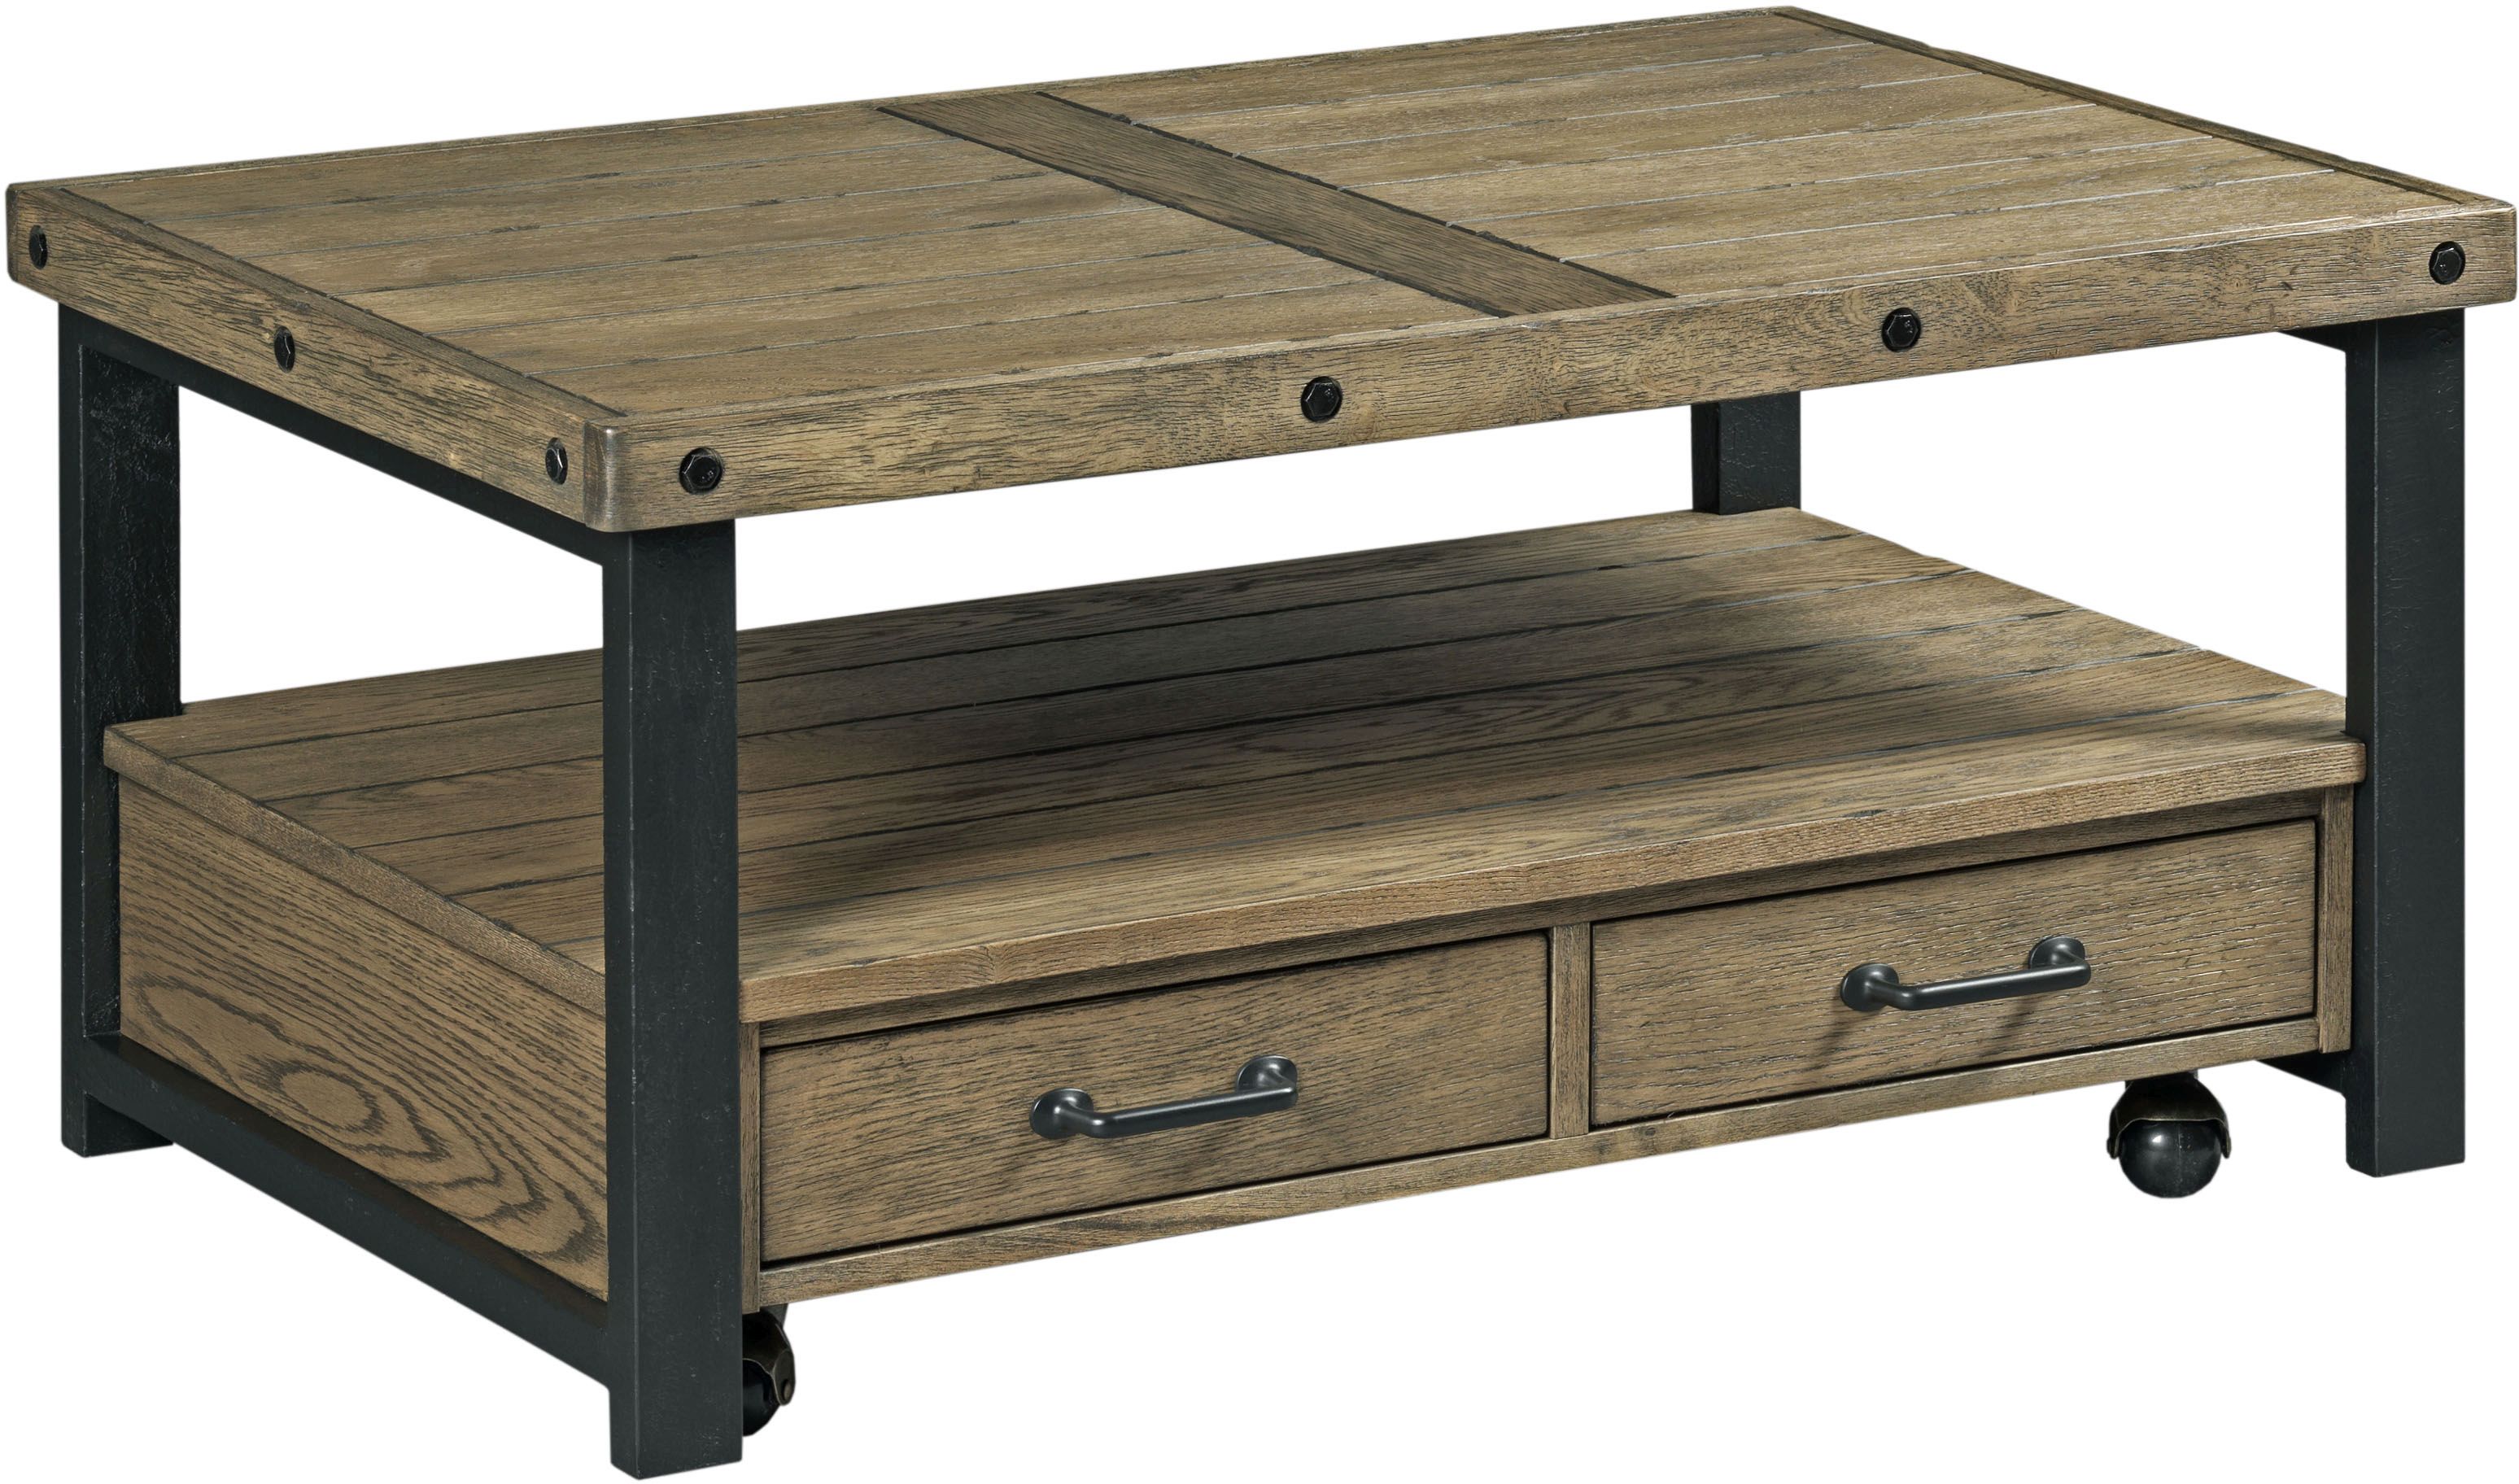 England Furniture Workbench Small Rectangular Cocktail Table